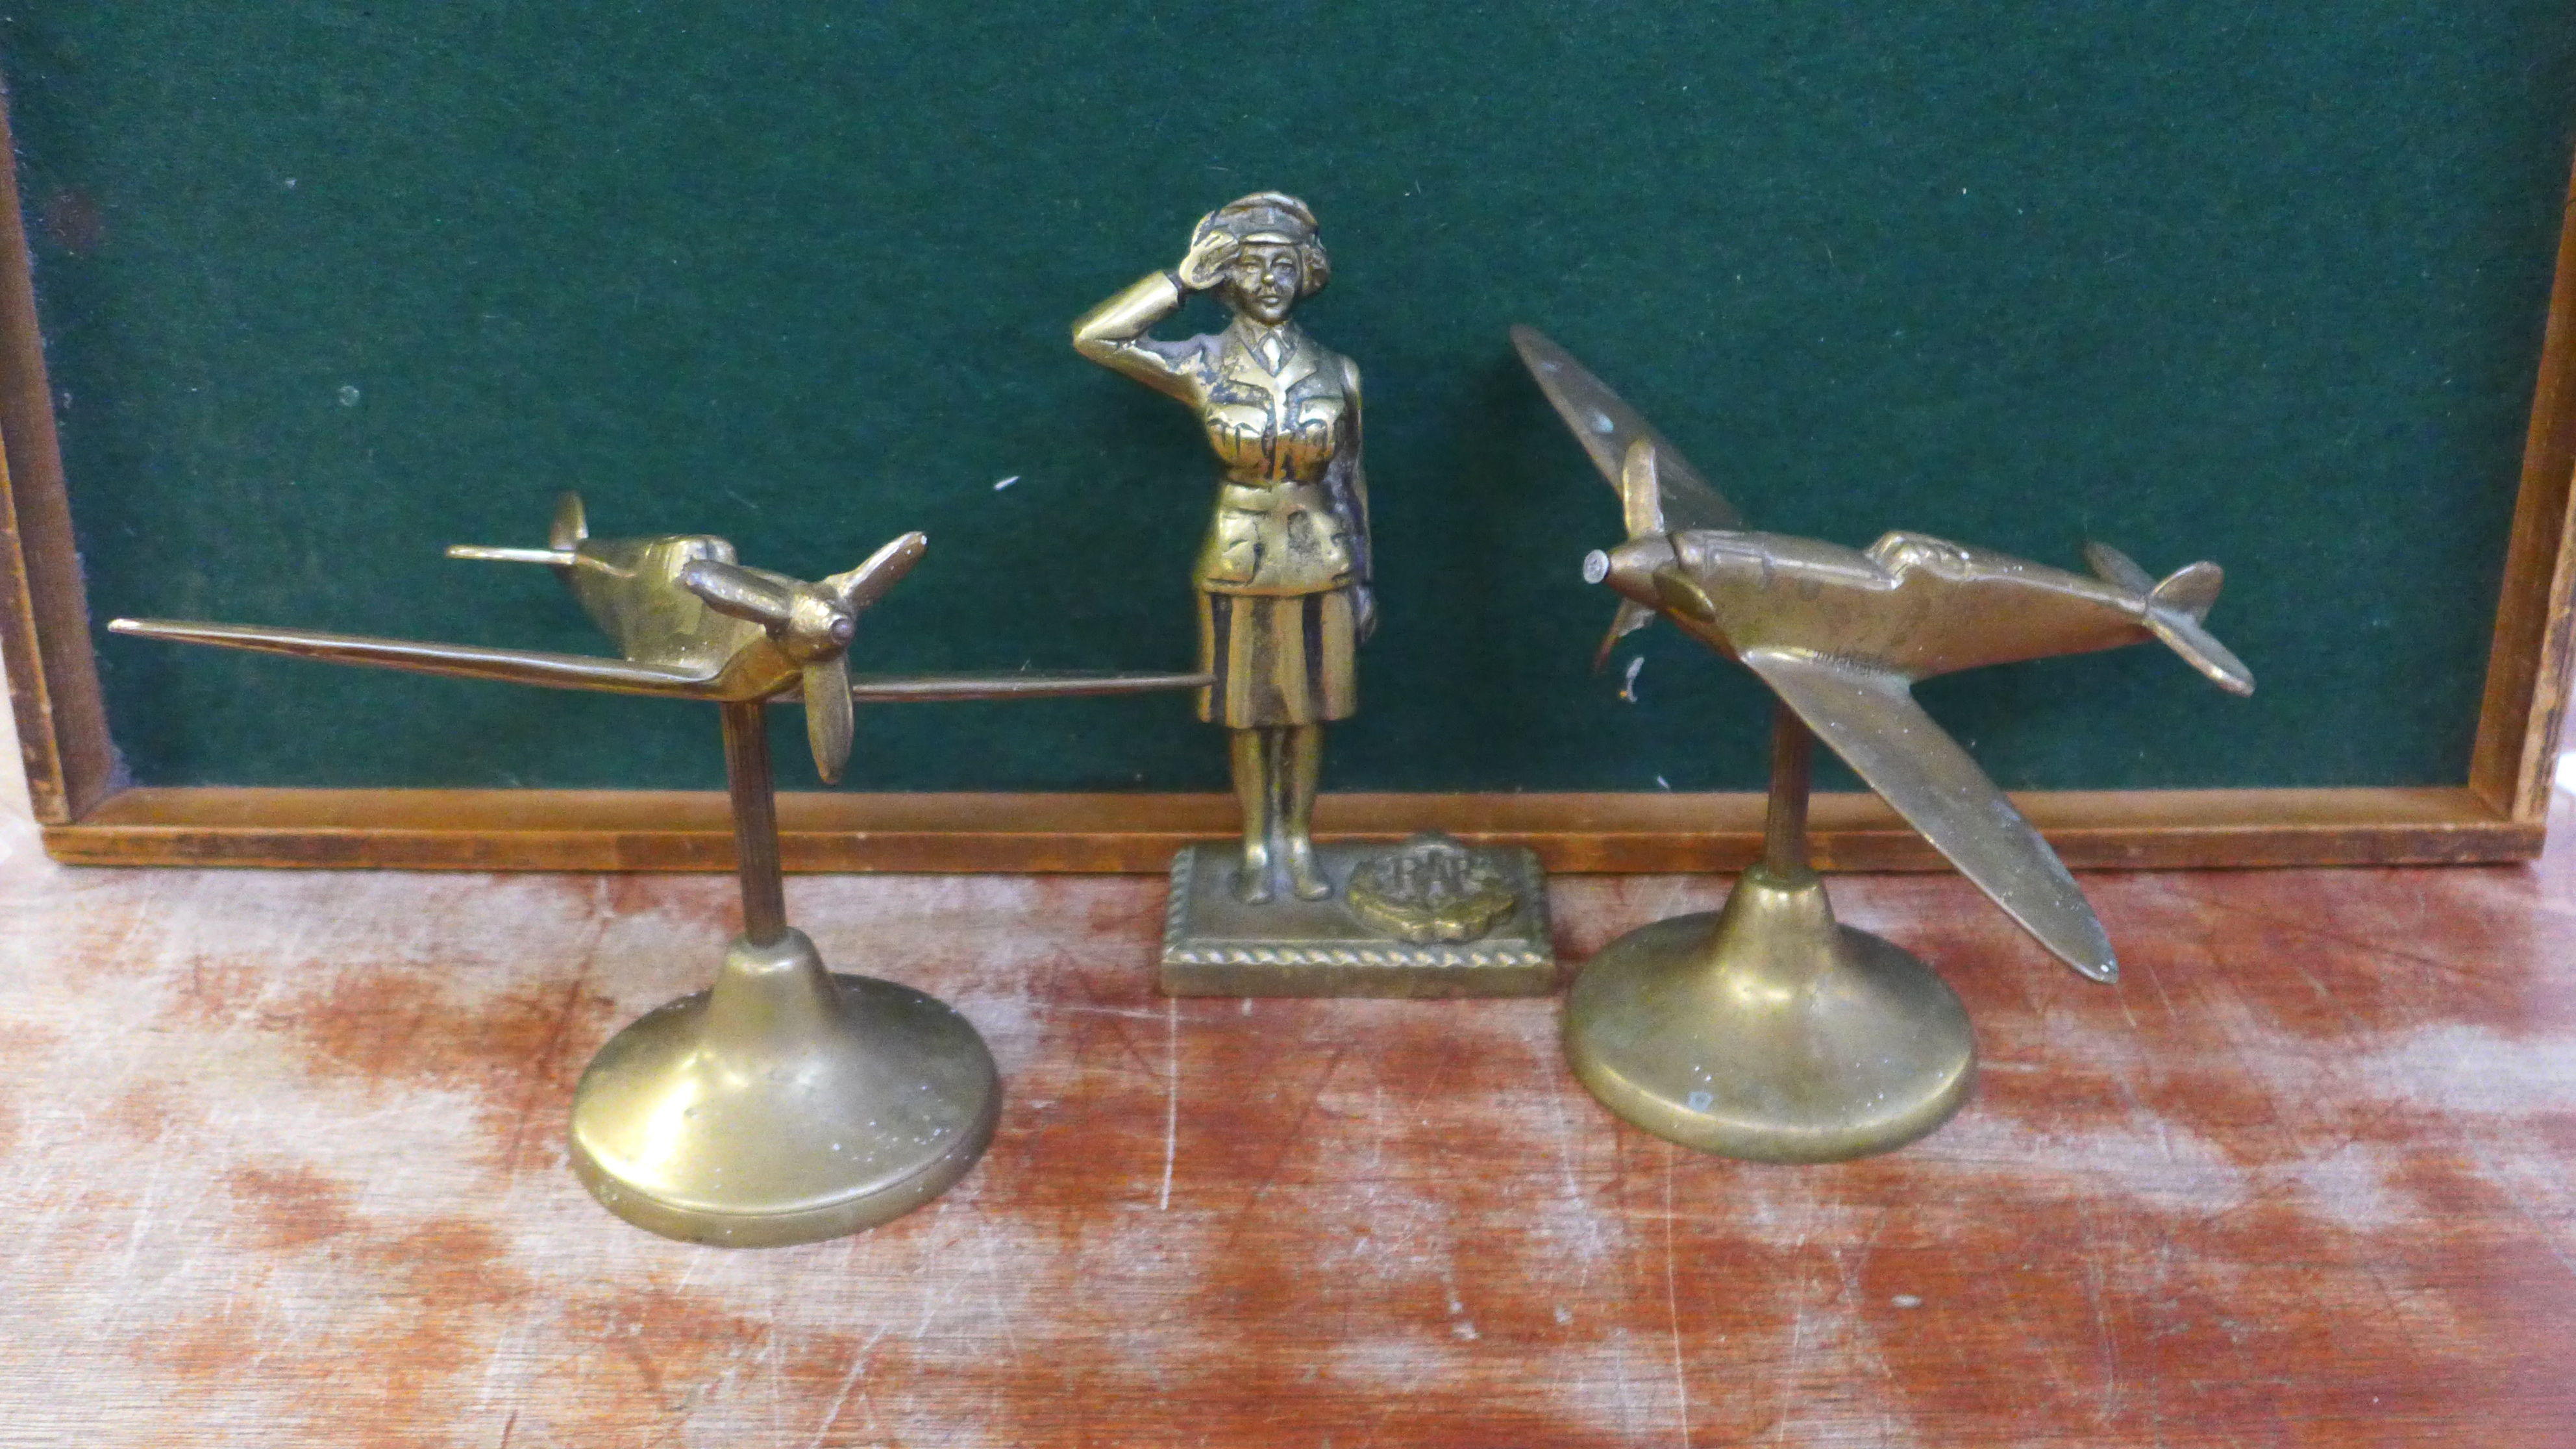 Two brass models of Spitfires and a brass model of a RAF wren